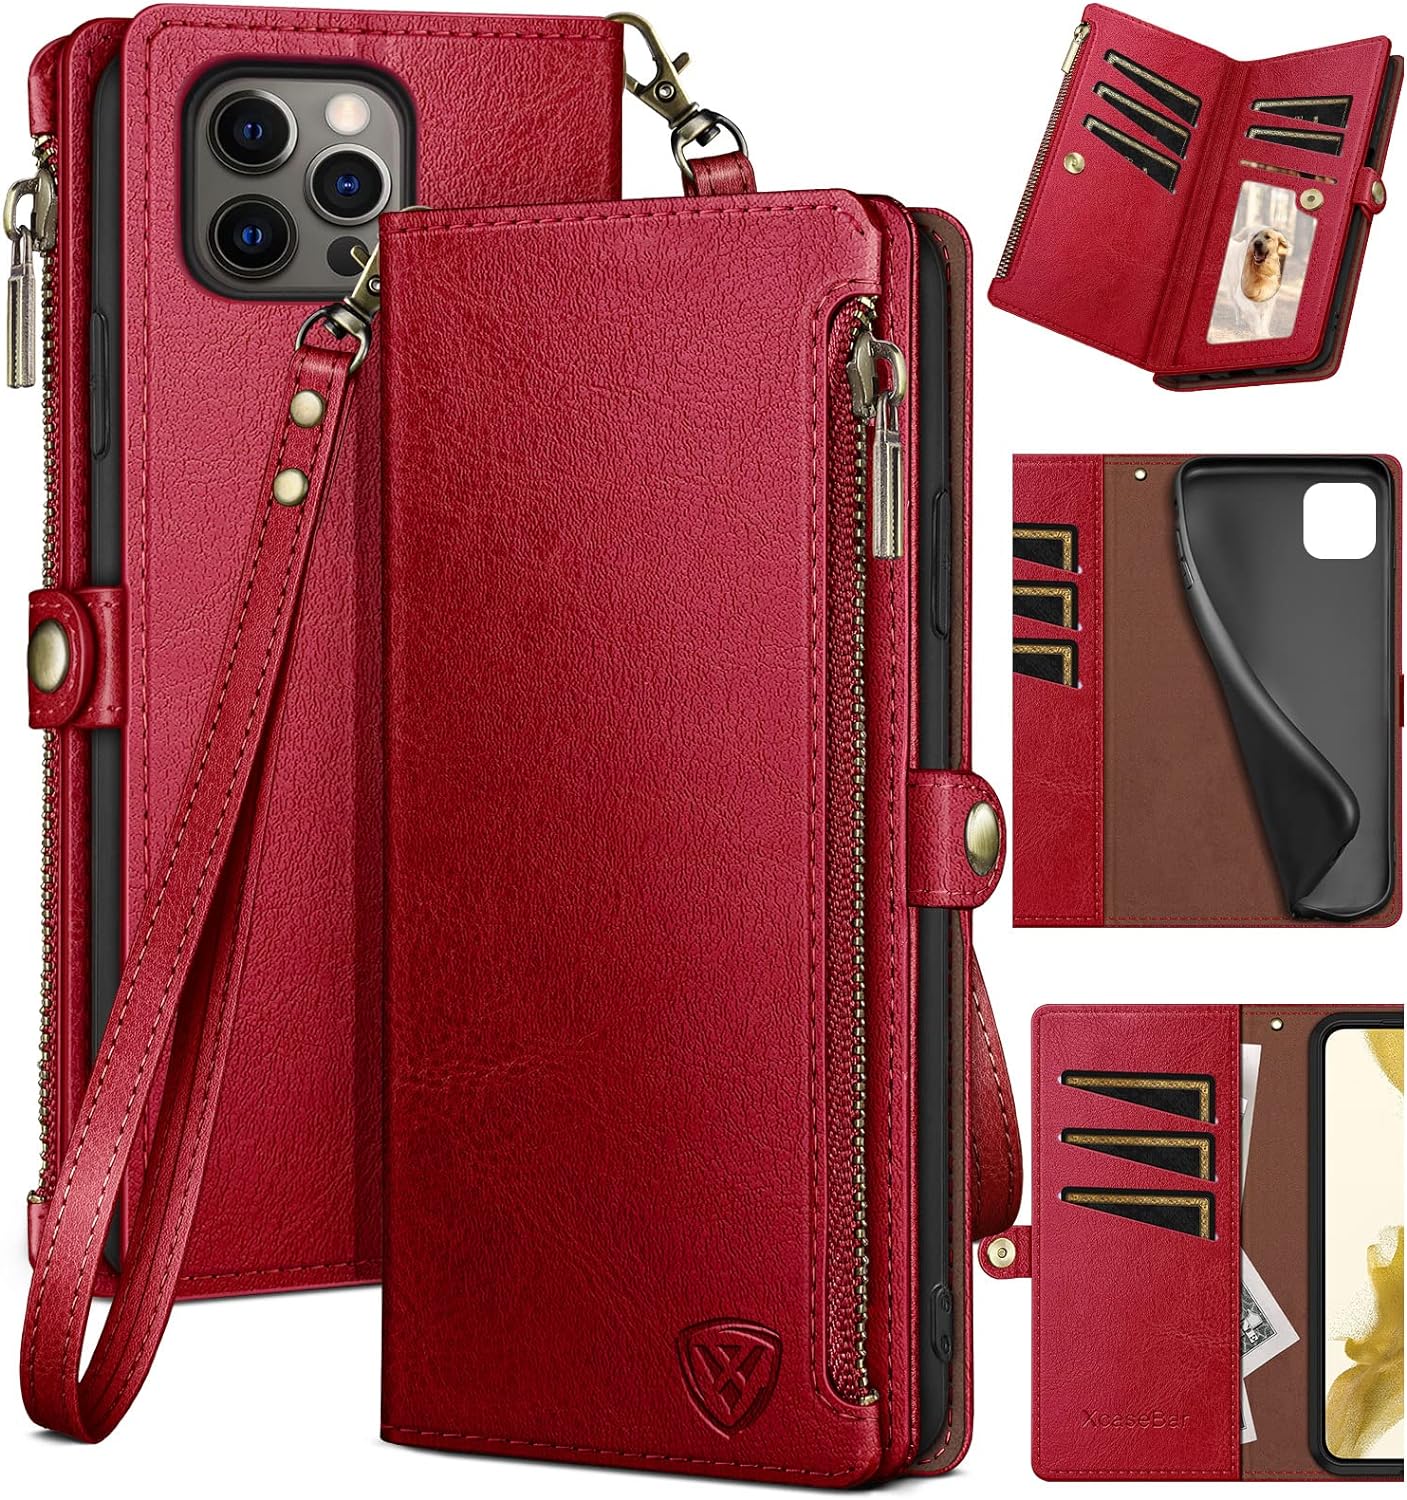 XcaseBar for iPhone 14 Pro Max 6.7″ Wallet case with Zipper Credit Card Holder【RFID Blocking】, Flip Folio Book PU Leather Phone case Shockproof Cover Women Men for Apple 14 Pro Max case Red